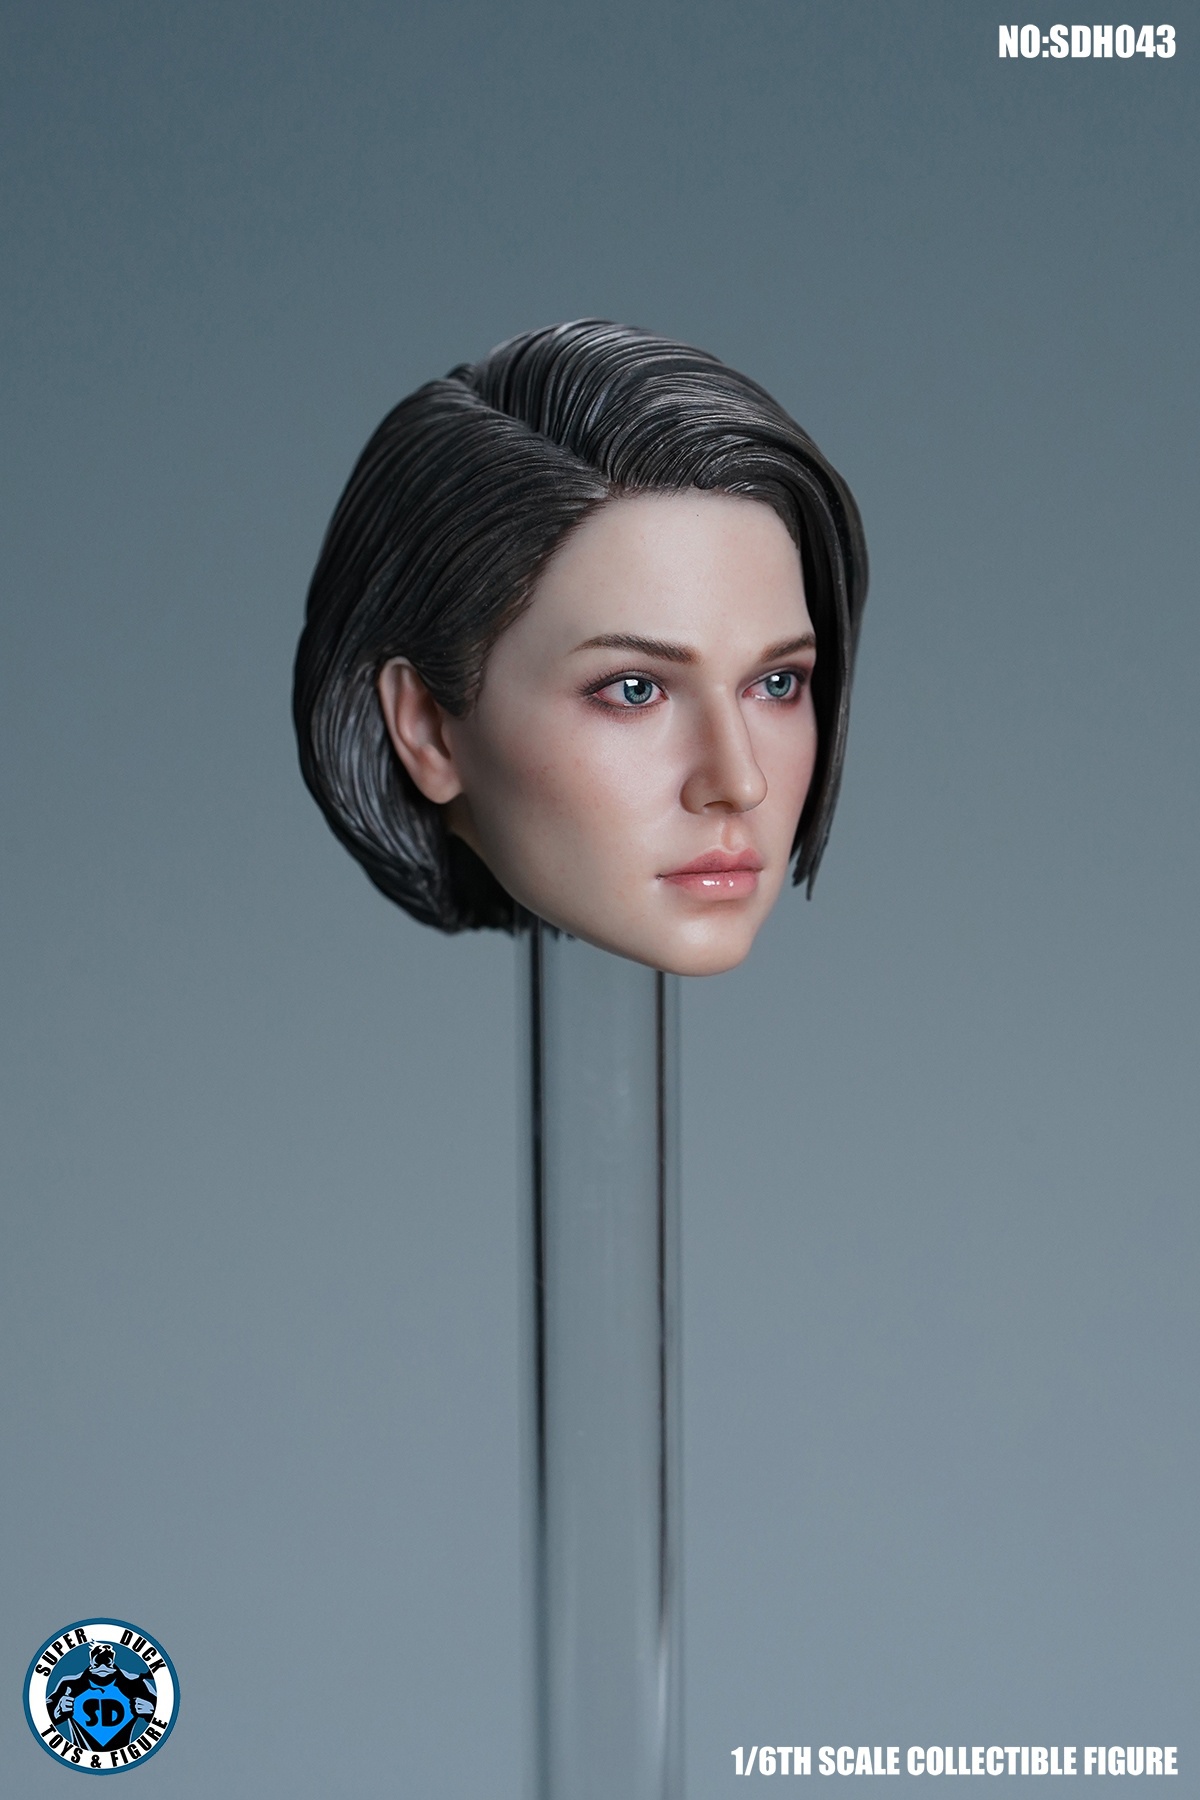 NEW PRODUCT: SUPER DUCK - SDH043 biochemical policewoman head carving 0590